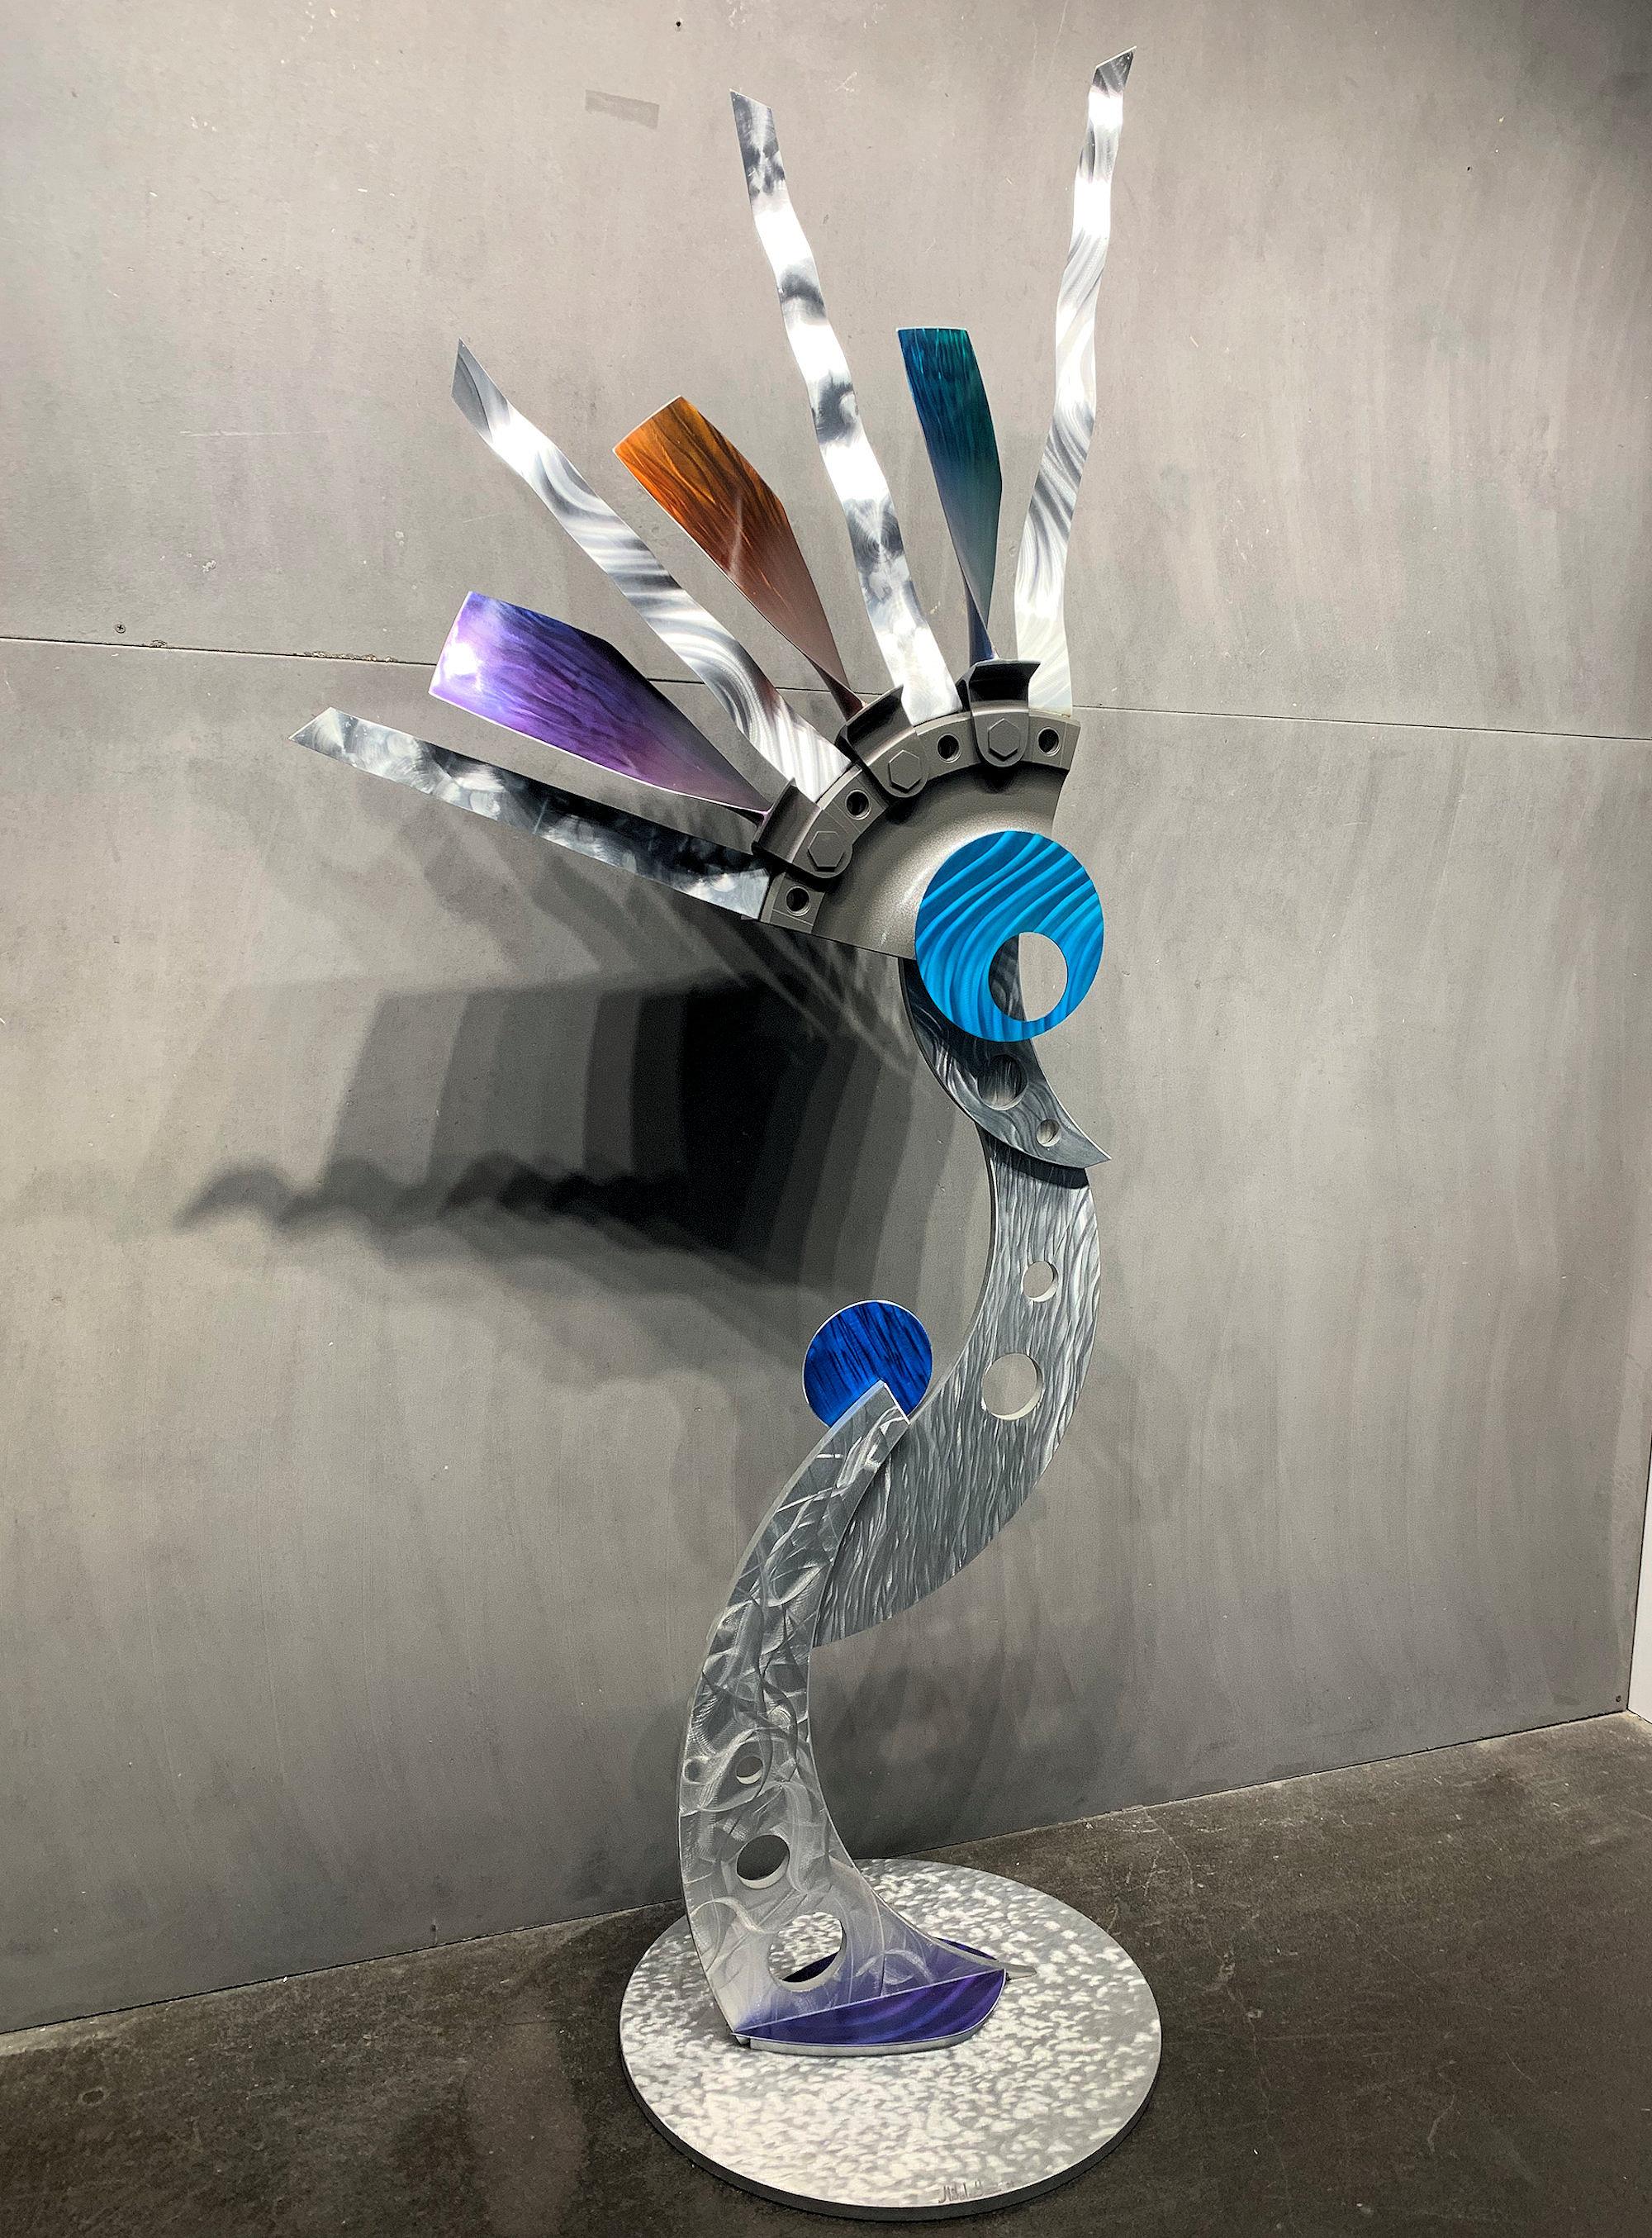 General Electric commissioned Sebastian to create this sculpture utilizing real aircraft engine parts.  This sculpture was shown at their annual benefit charity gala. The sculpture was on display at the General Electric Aviation facility in